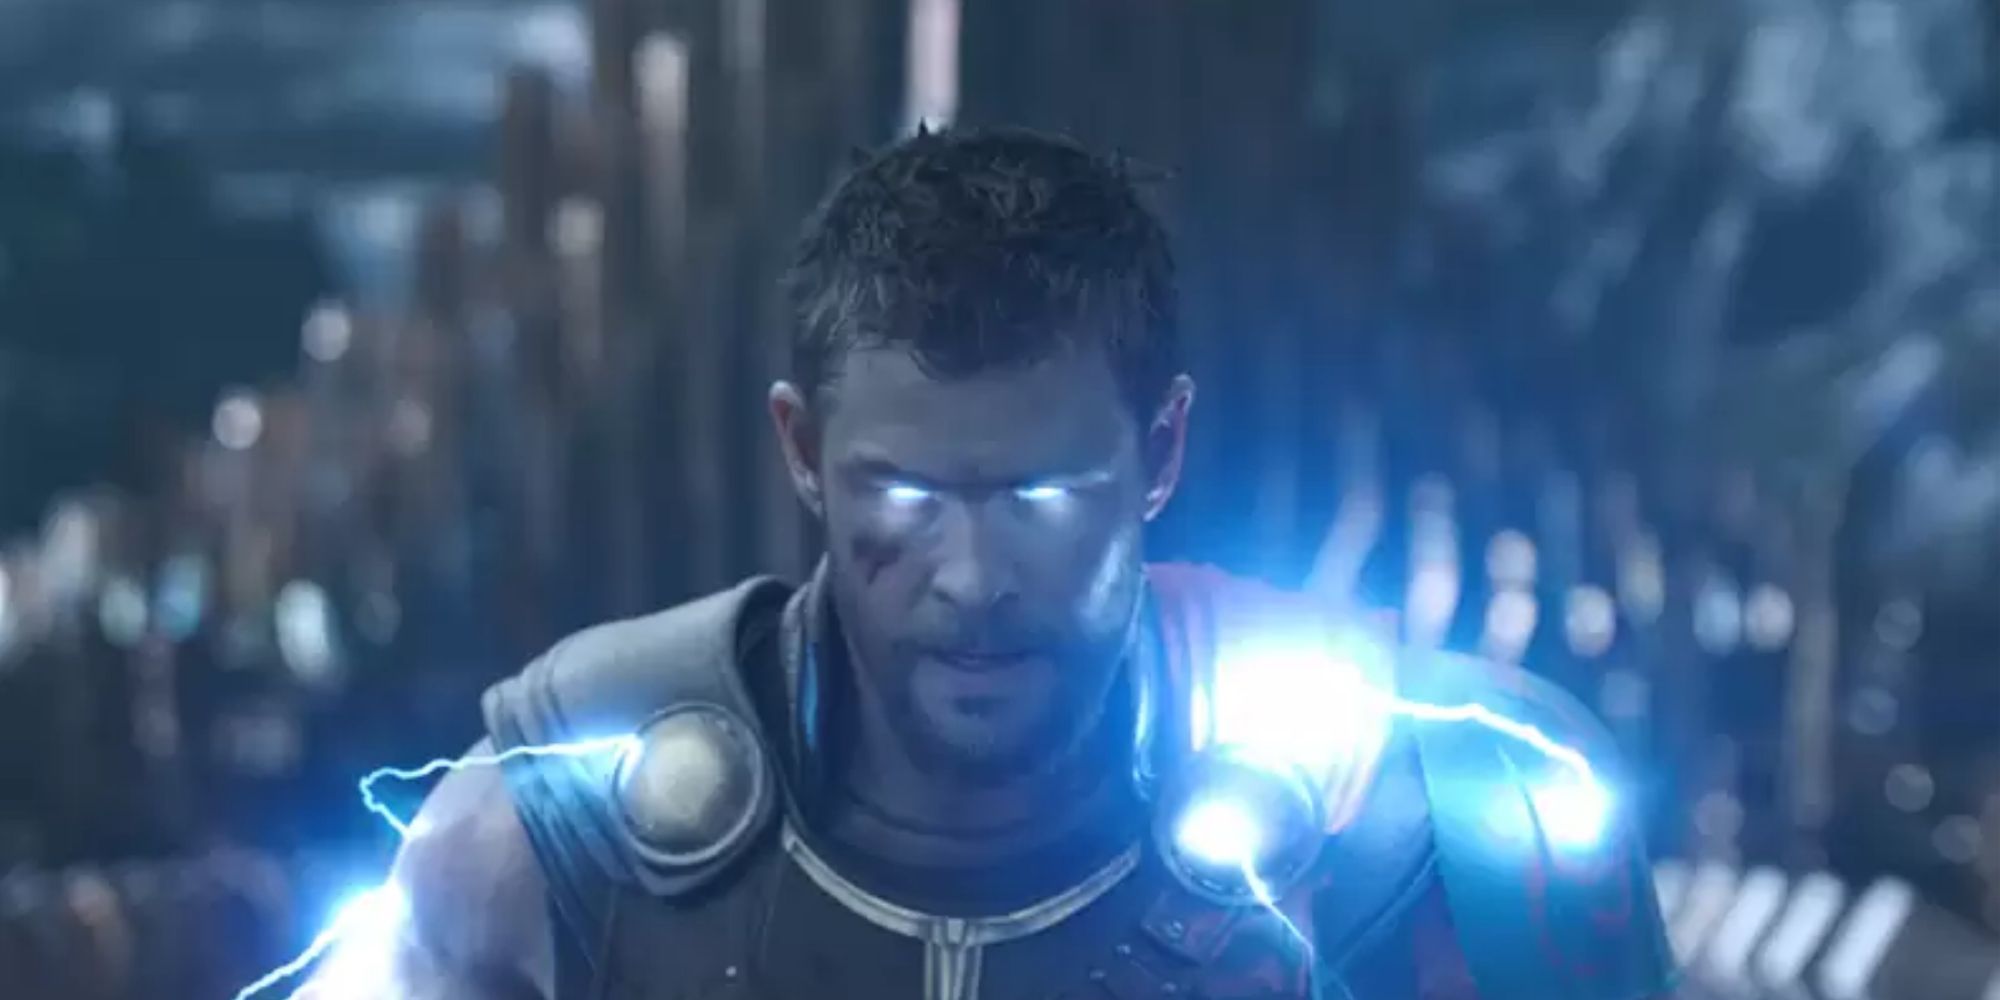 Chris Hemsworth as Thor unleashing his lightning powers in the climax of Thor Ragnarok